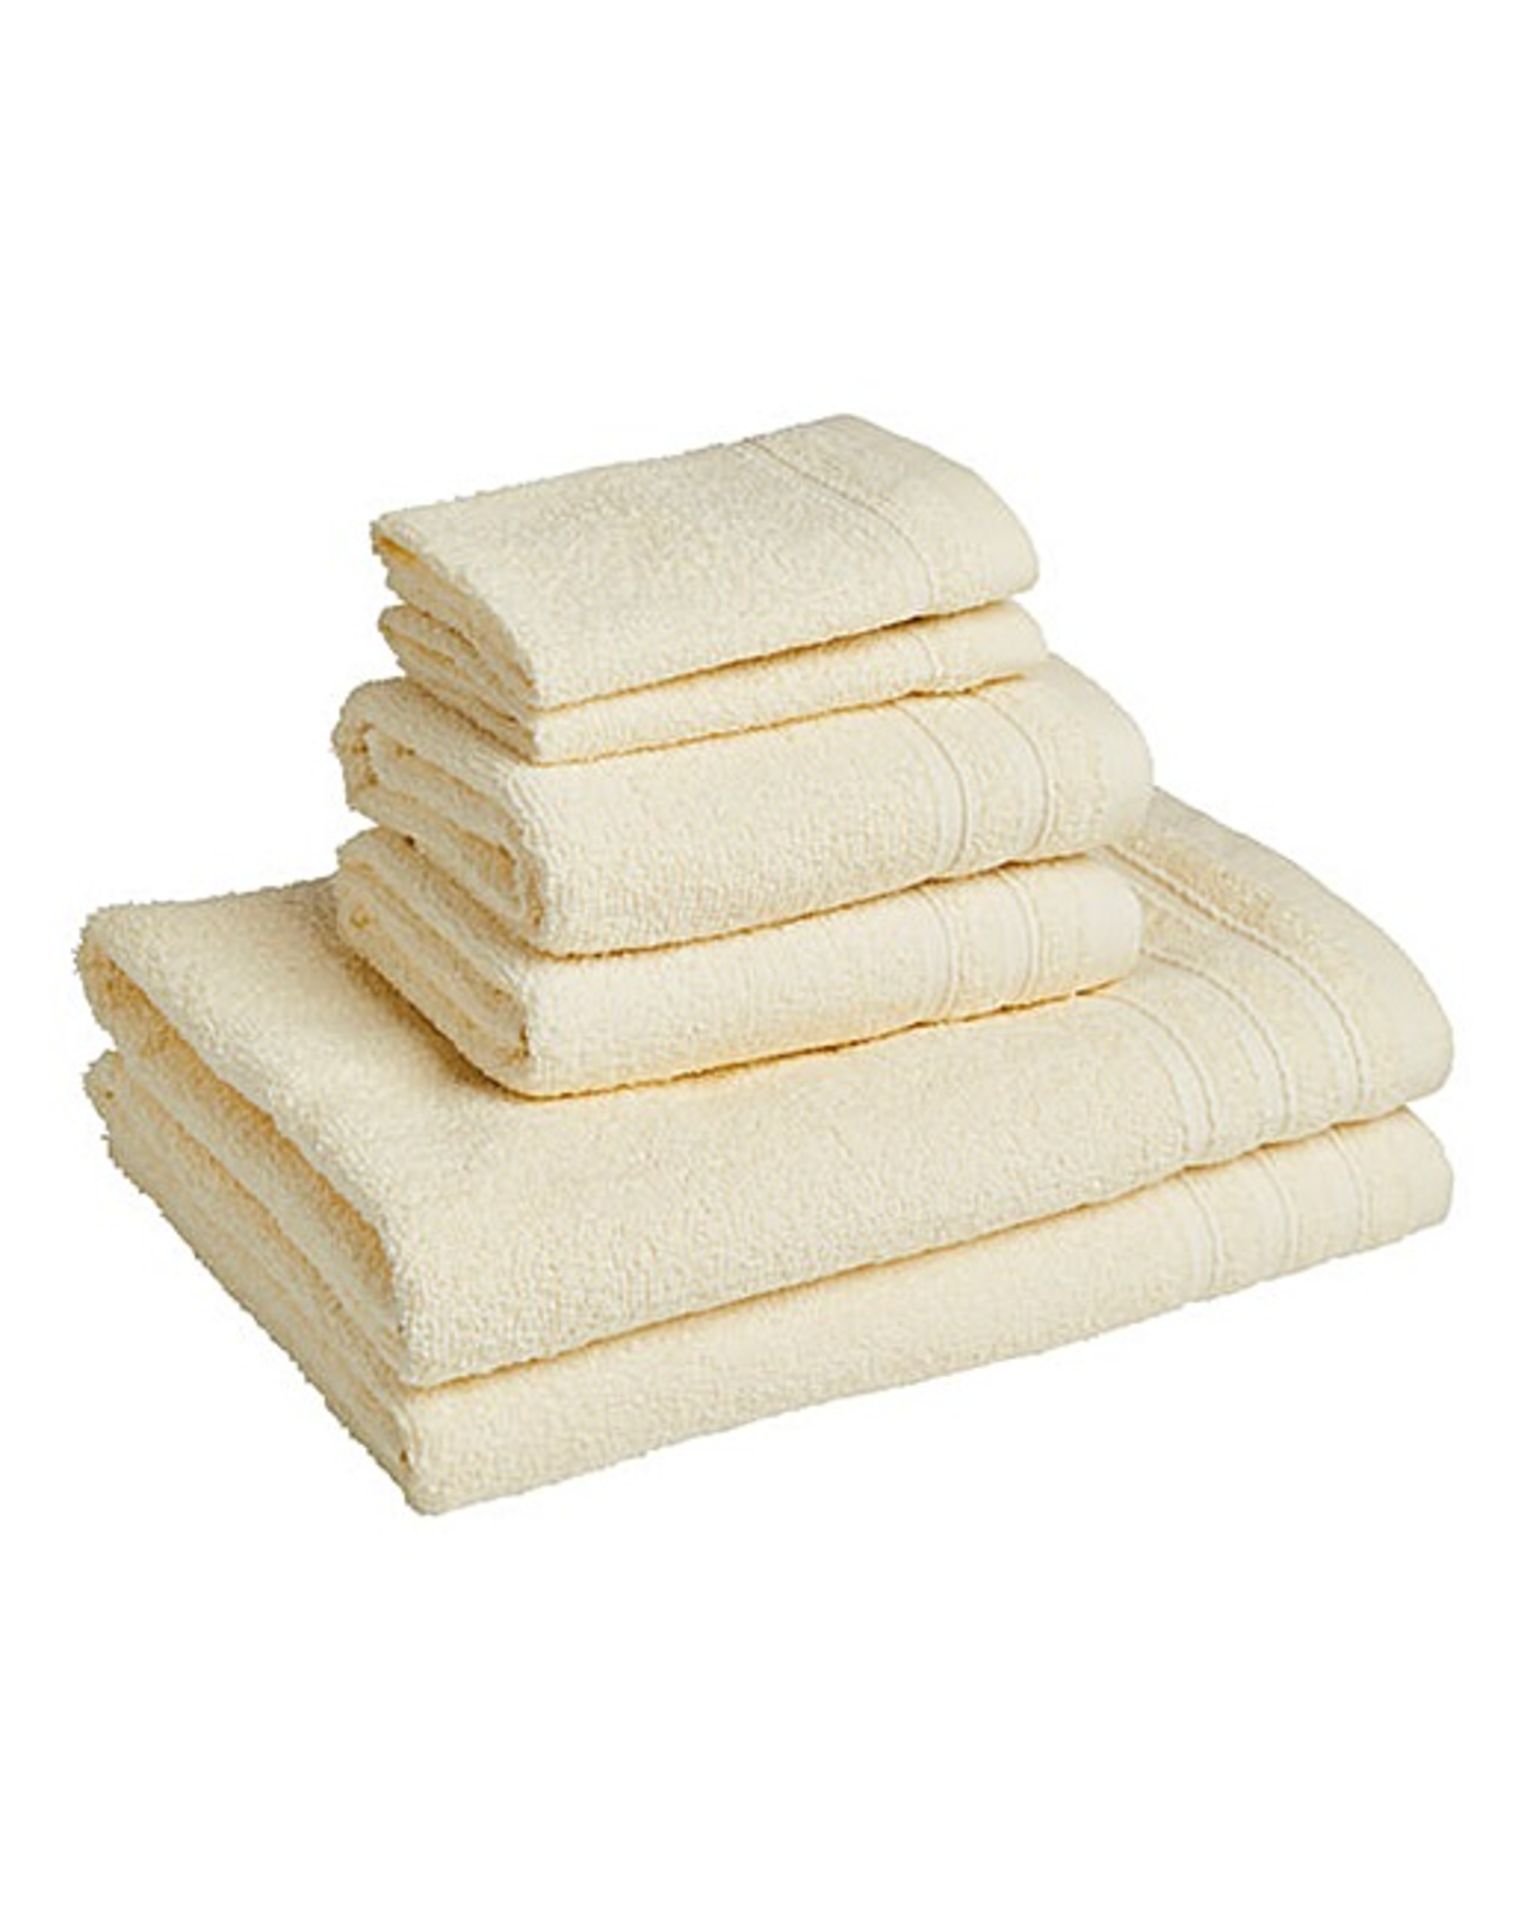 Brand New Six Piece Cream Towel Bale Set Including Two Bath Towels-Two Hand Towels & Two Face